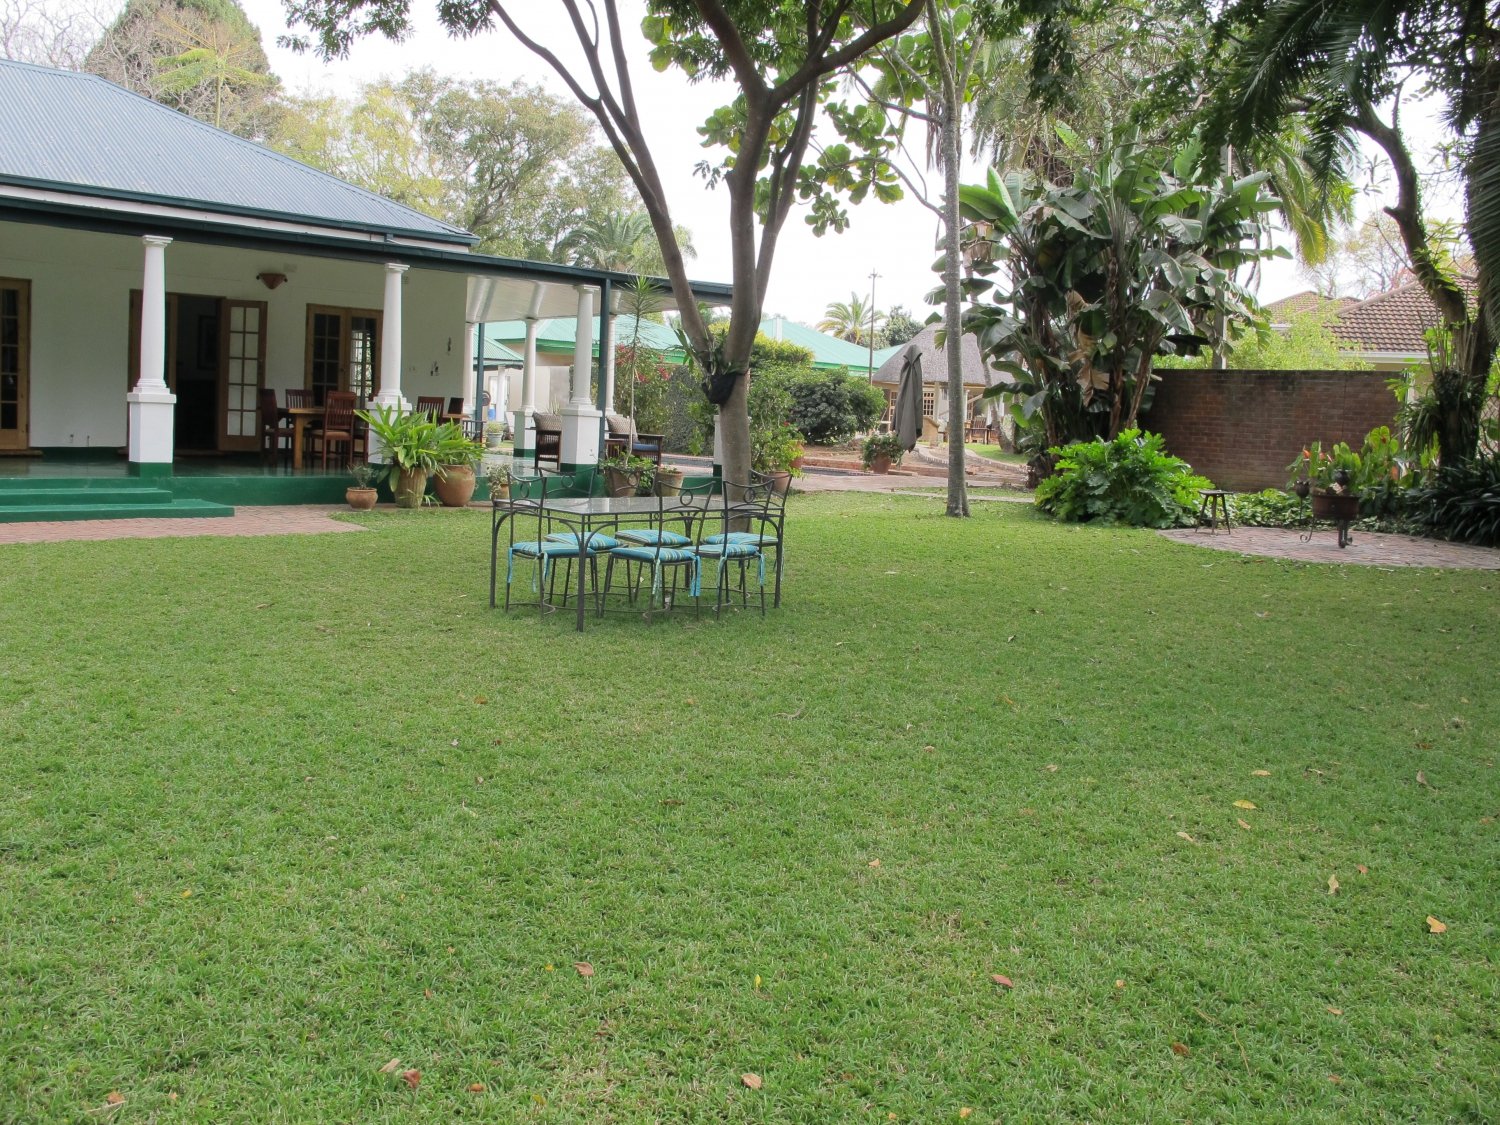 Recommended B & B's in Harare